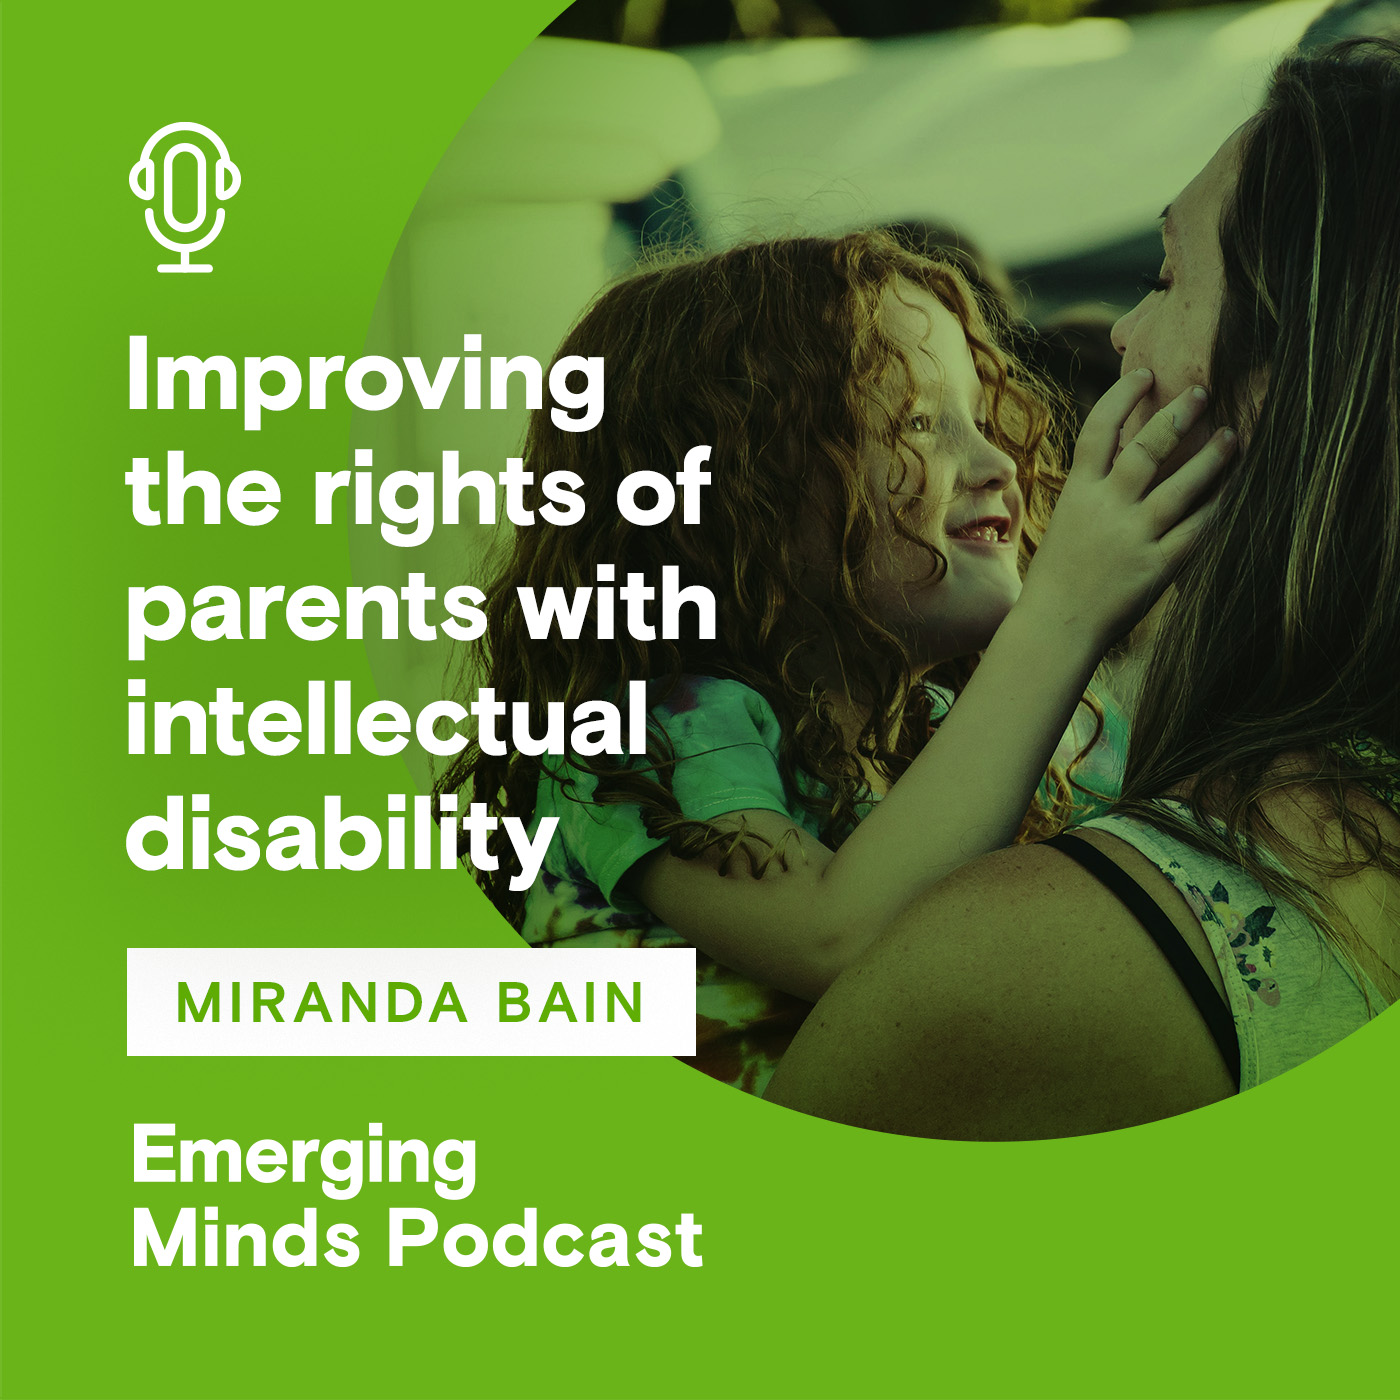 Improving the rights of parents with intellectual disability